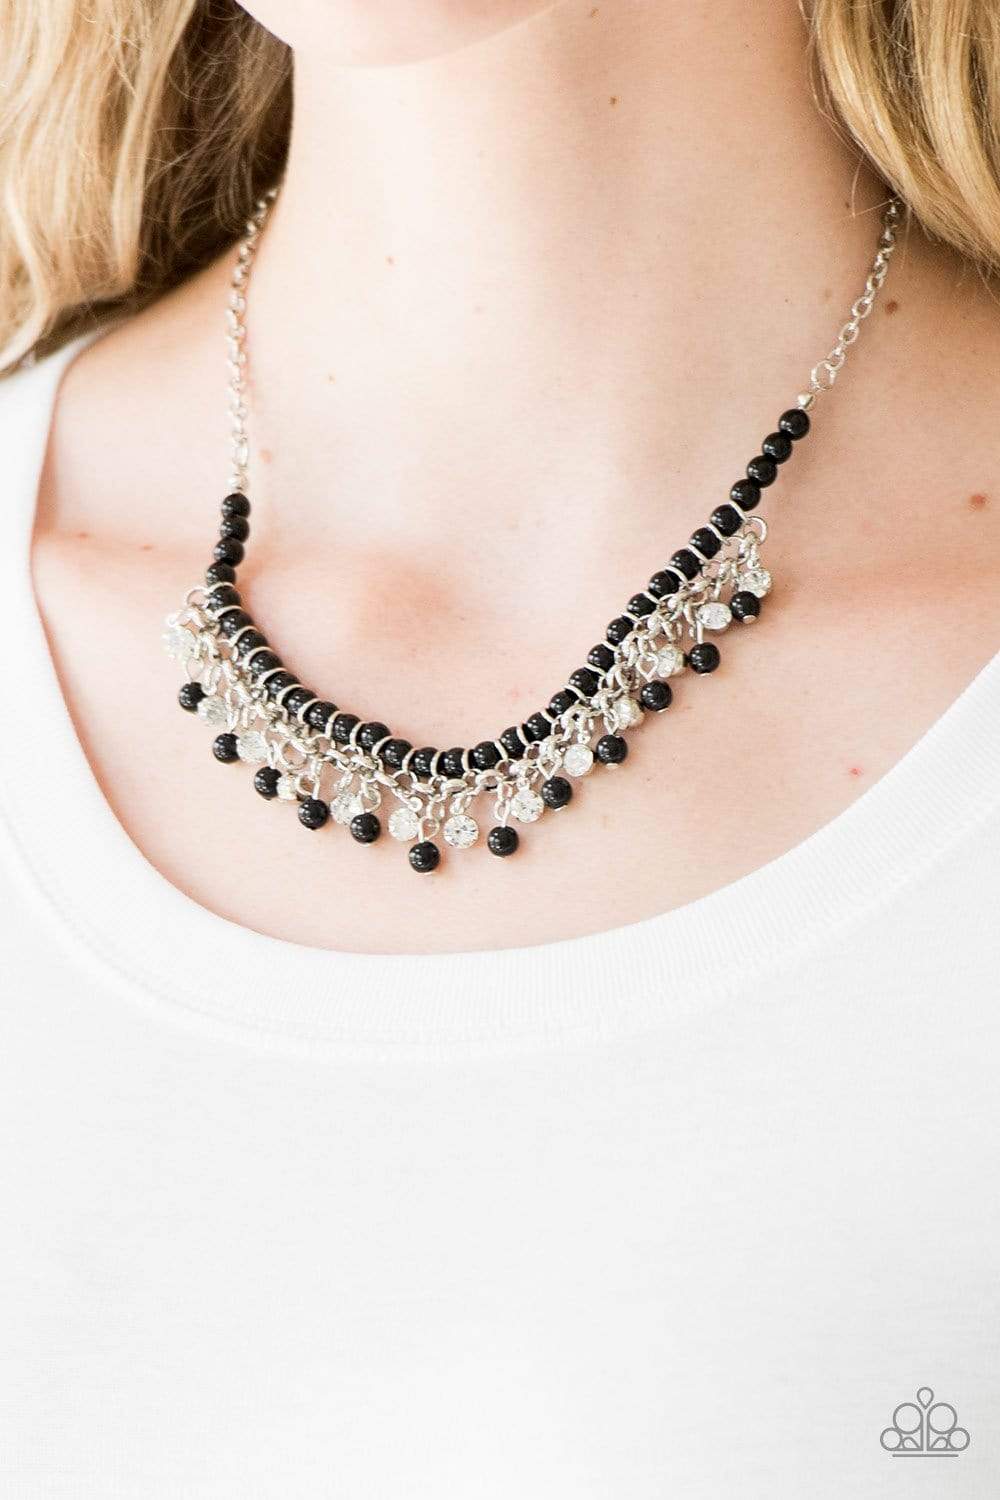 A Touch of CLASSY - Black Jewelry